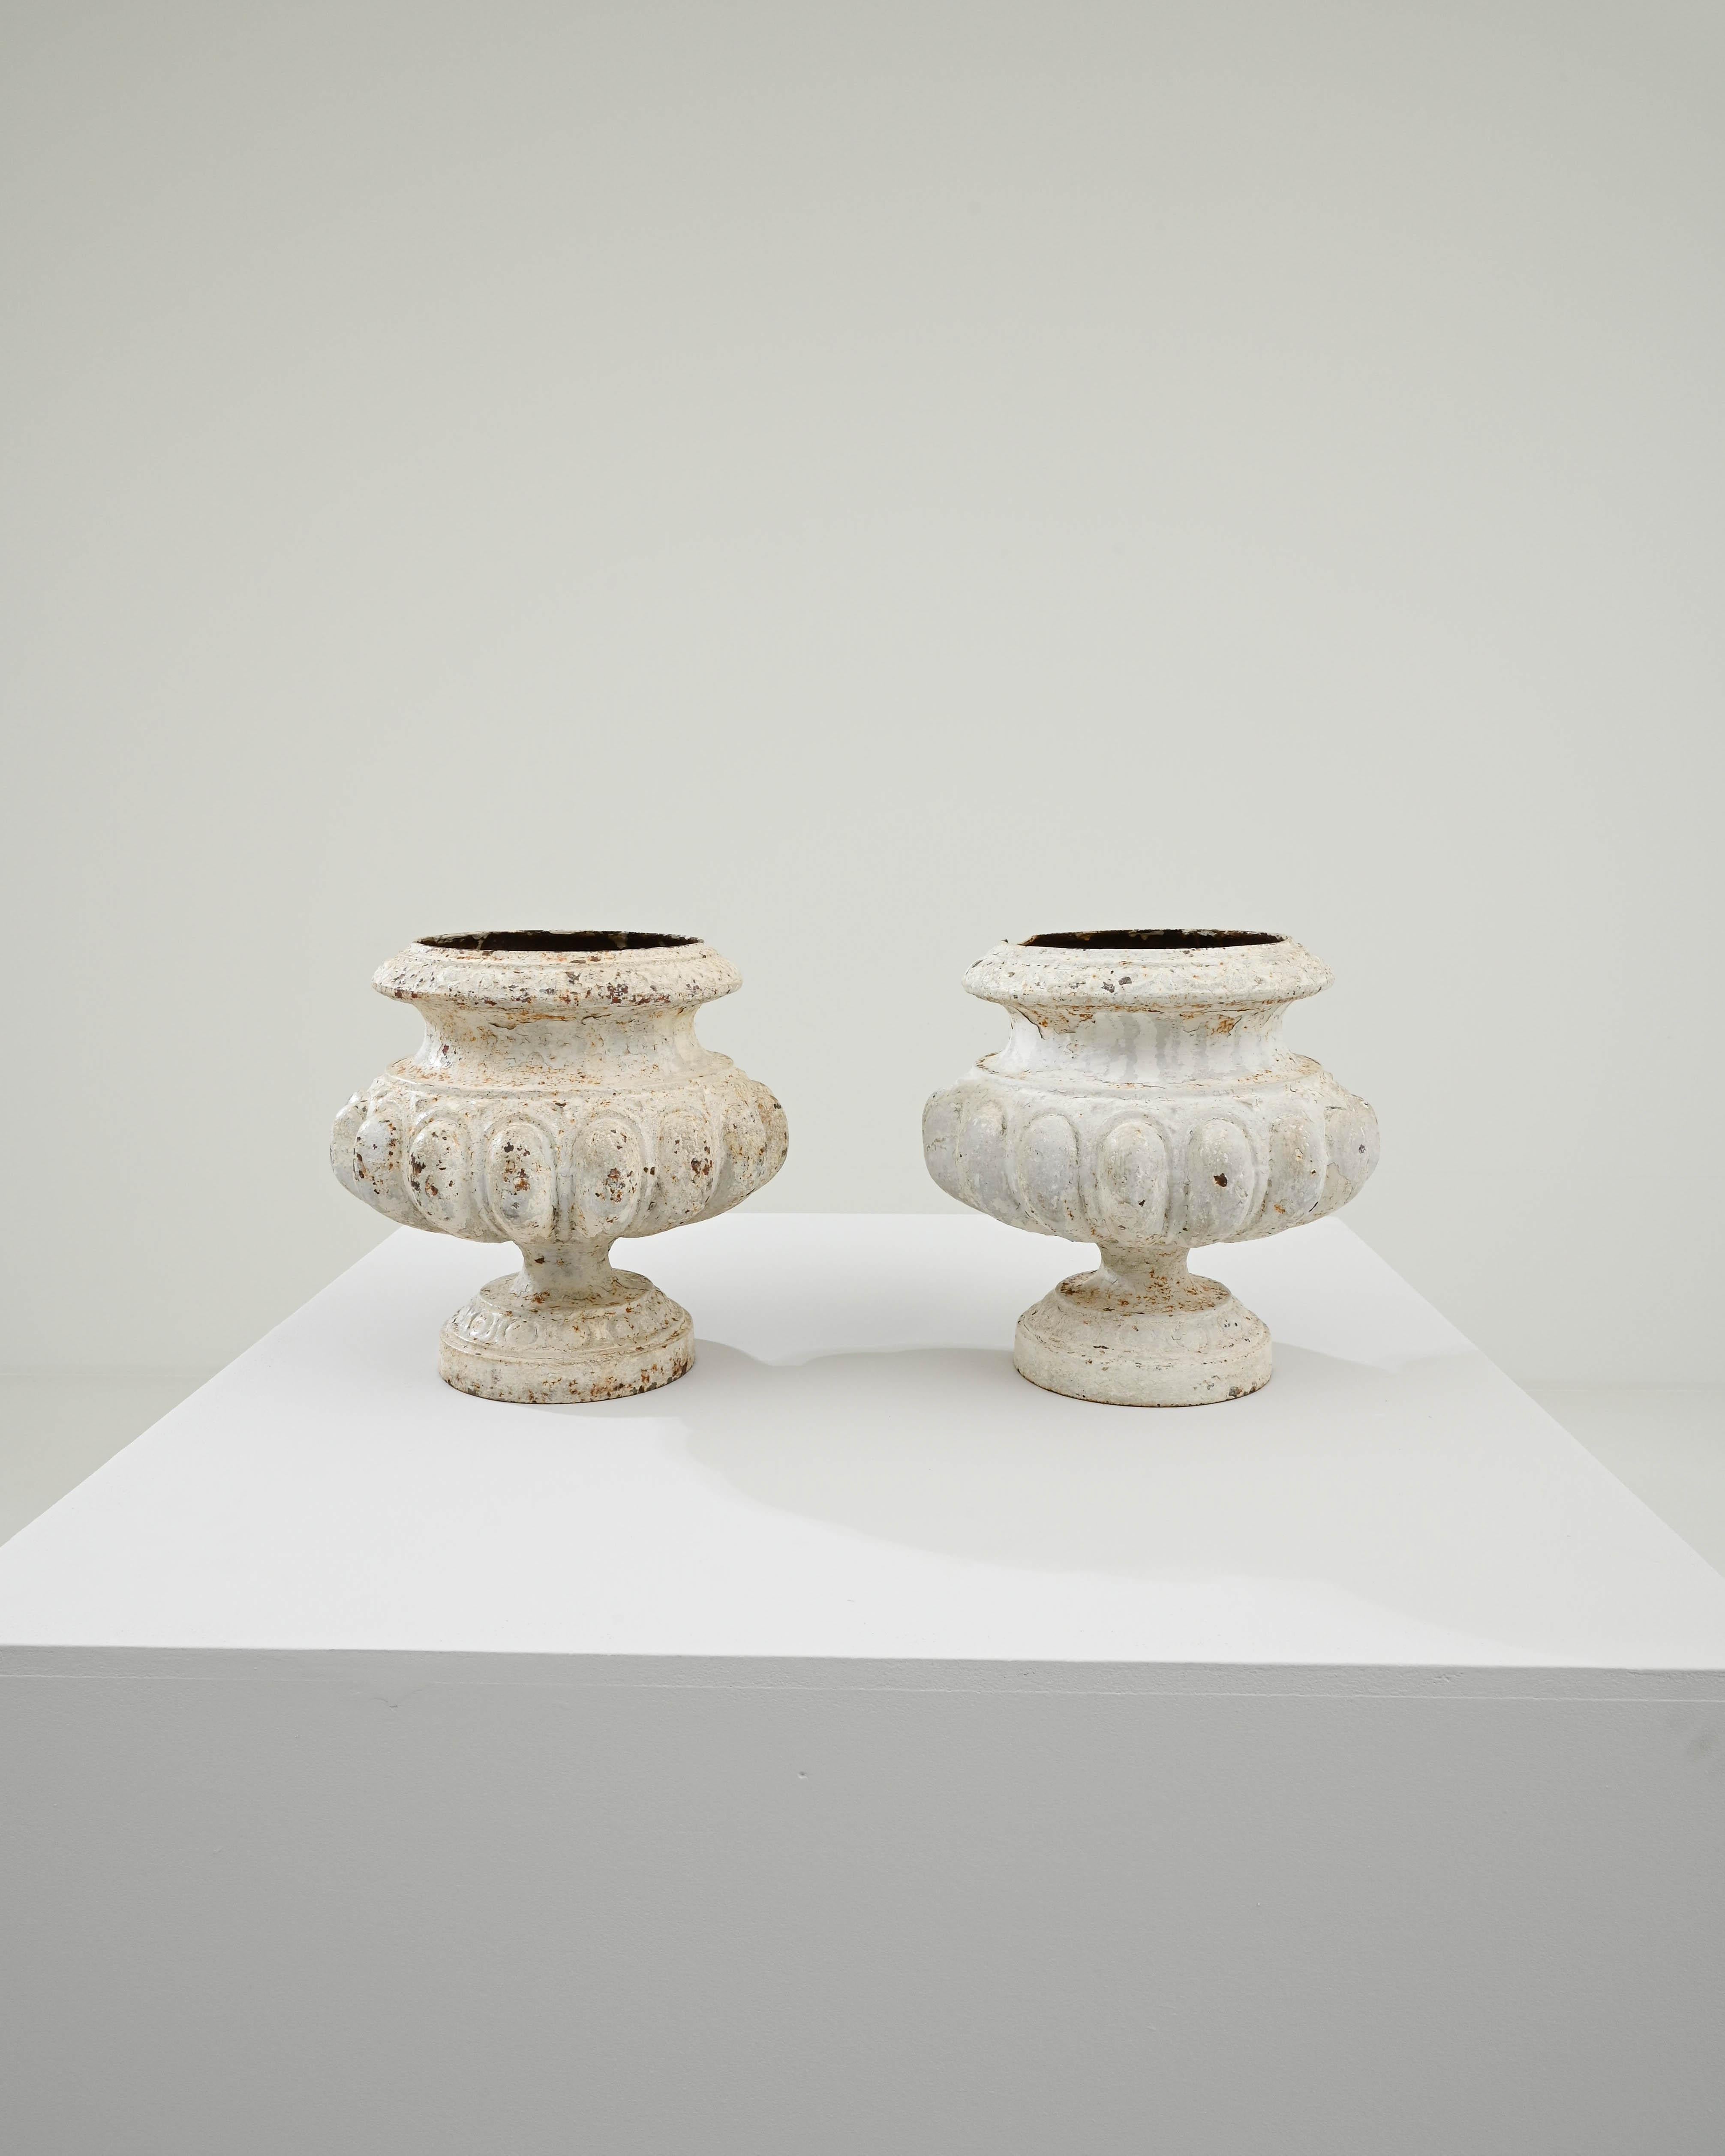 A pair of cast-iron planters created in 19th century France by Alfred Corneau. Elegantly shaped and tapered, these classical planters impart a sense of classical beauty and a timeless resilience. A sturdy circular base tapers to a point to undergird